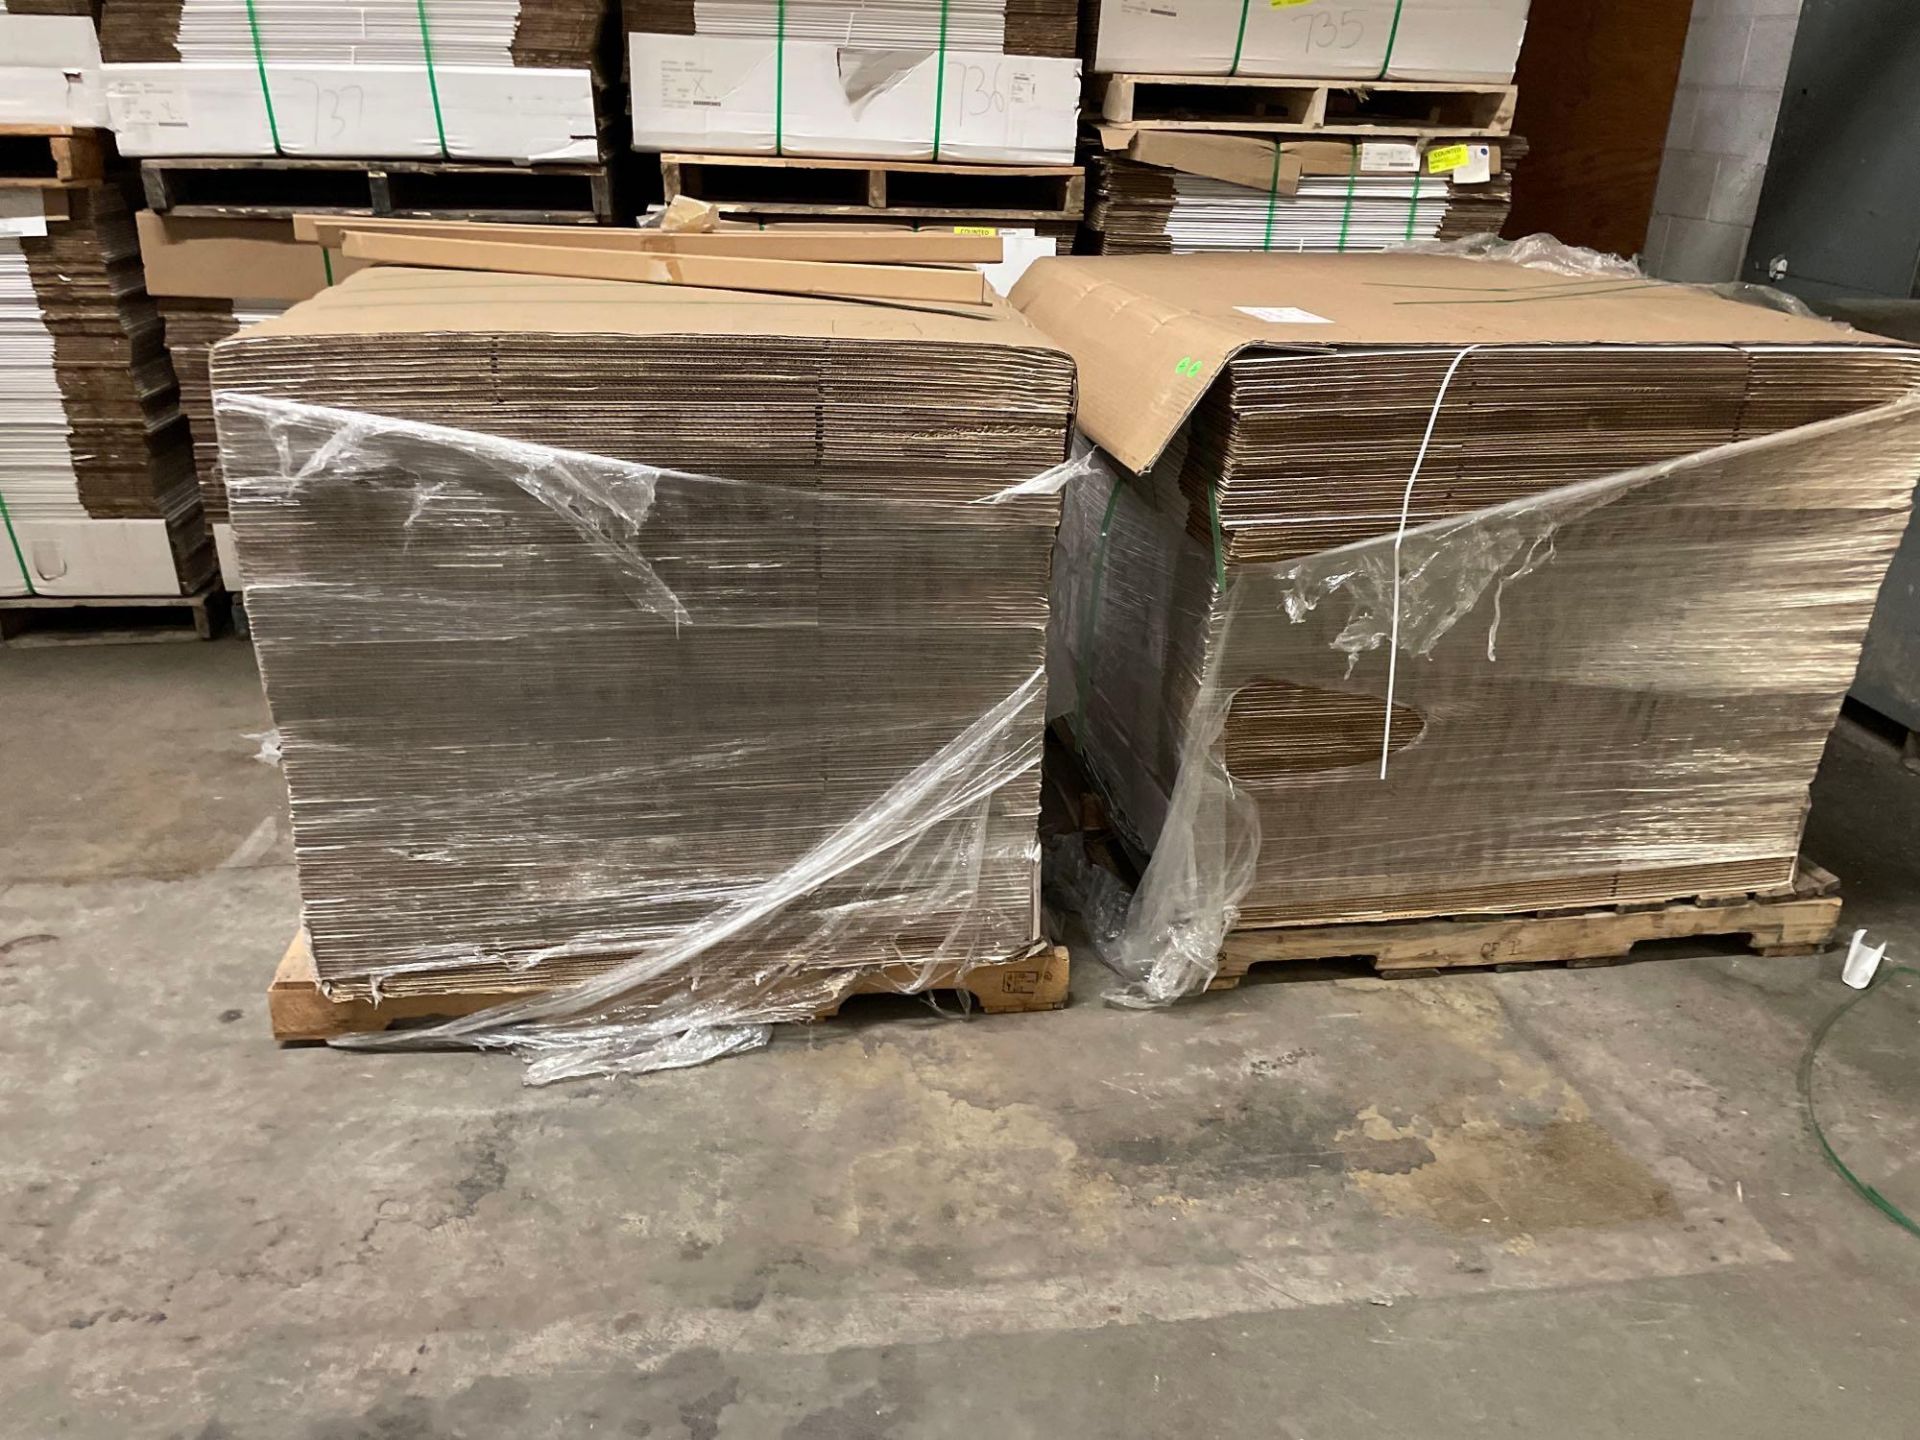 2 Pallets of Shipping boxes (branded printing, located in Ogden